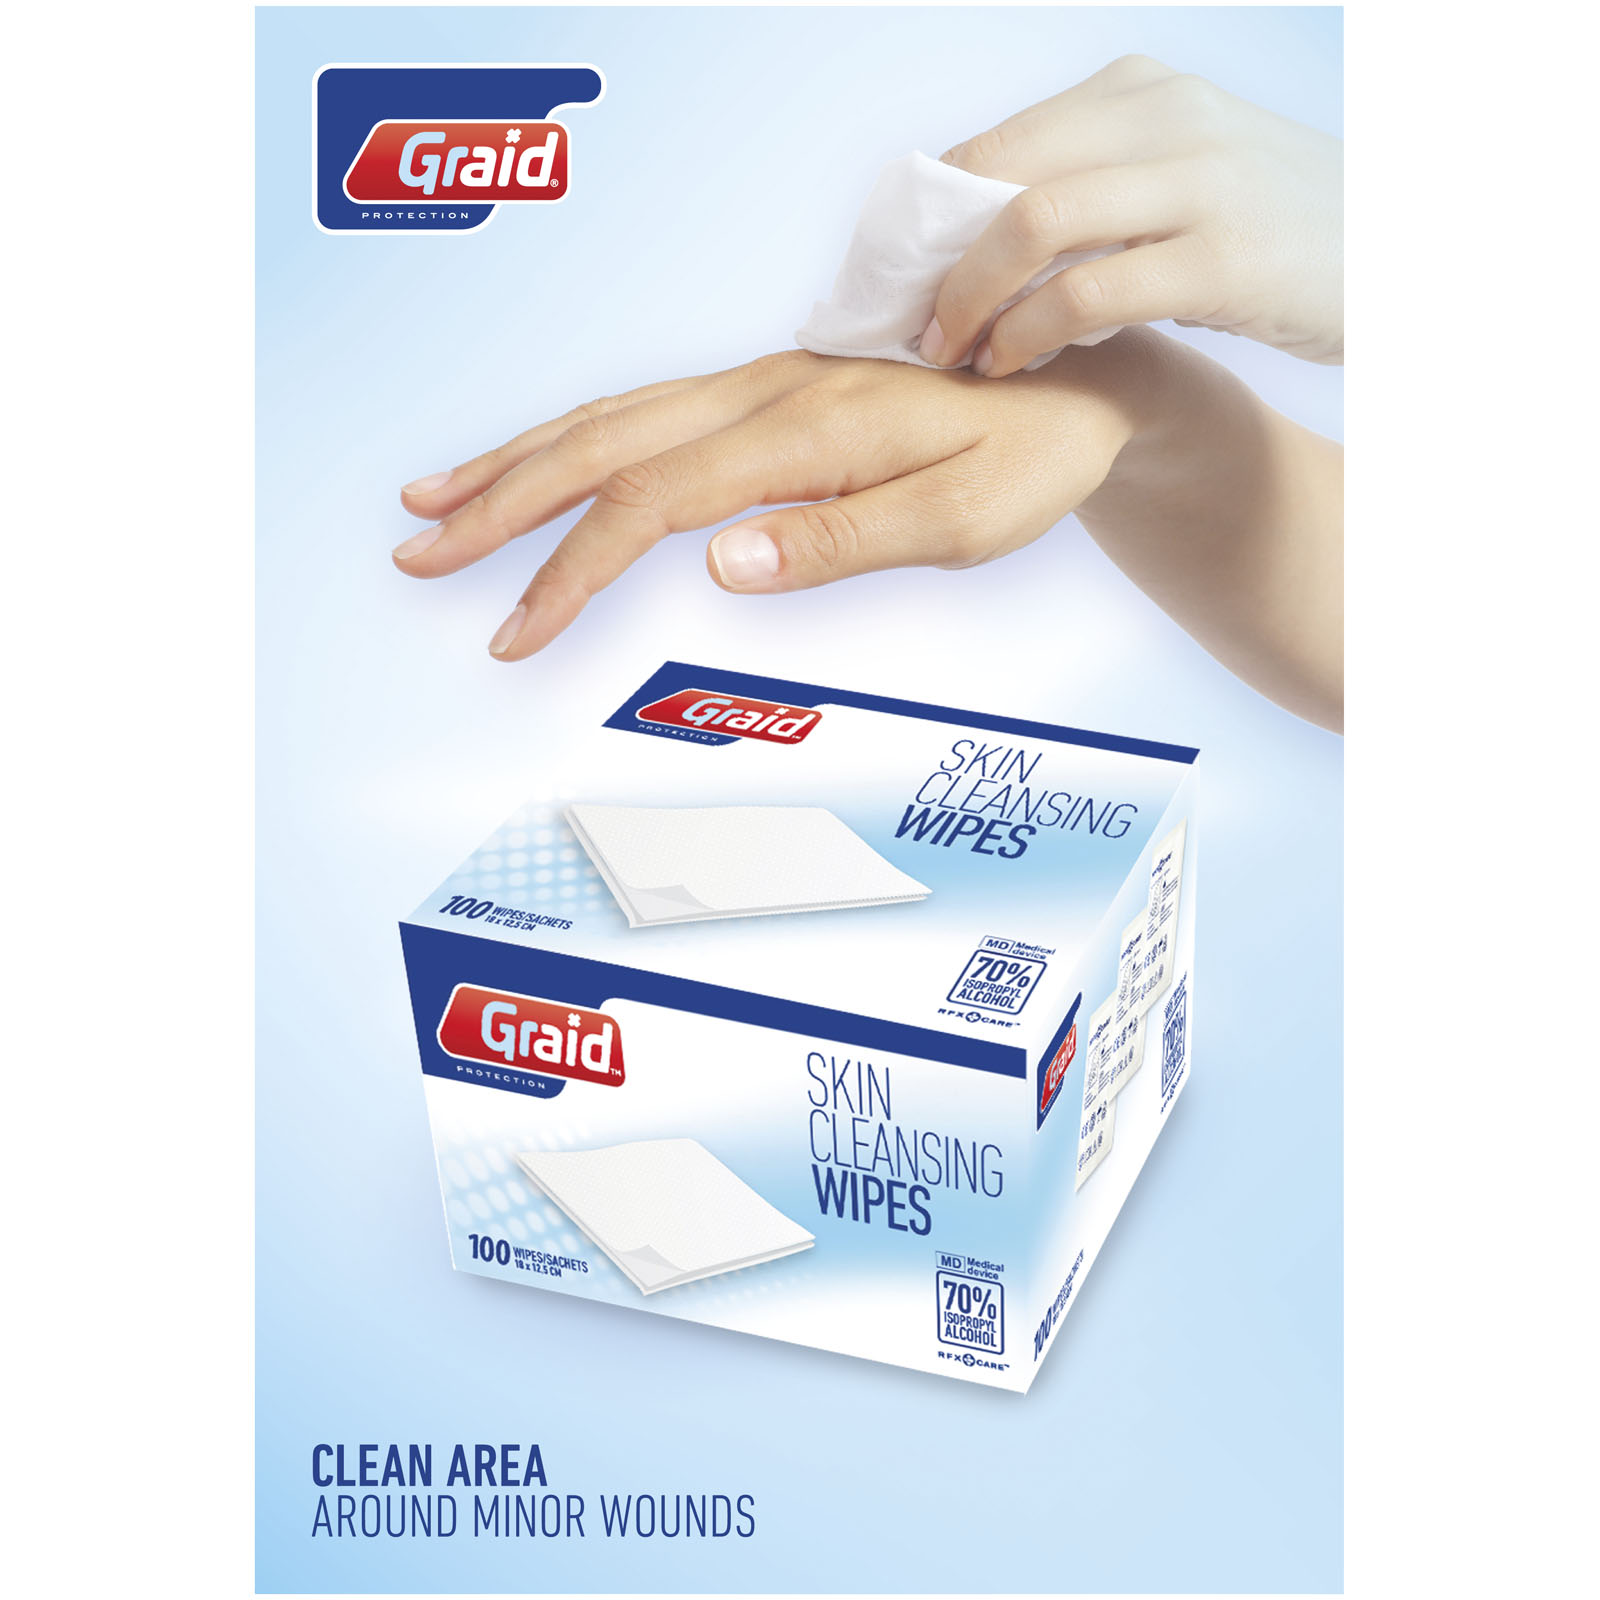 AluClean Wipes - Meopham - Greystoke